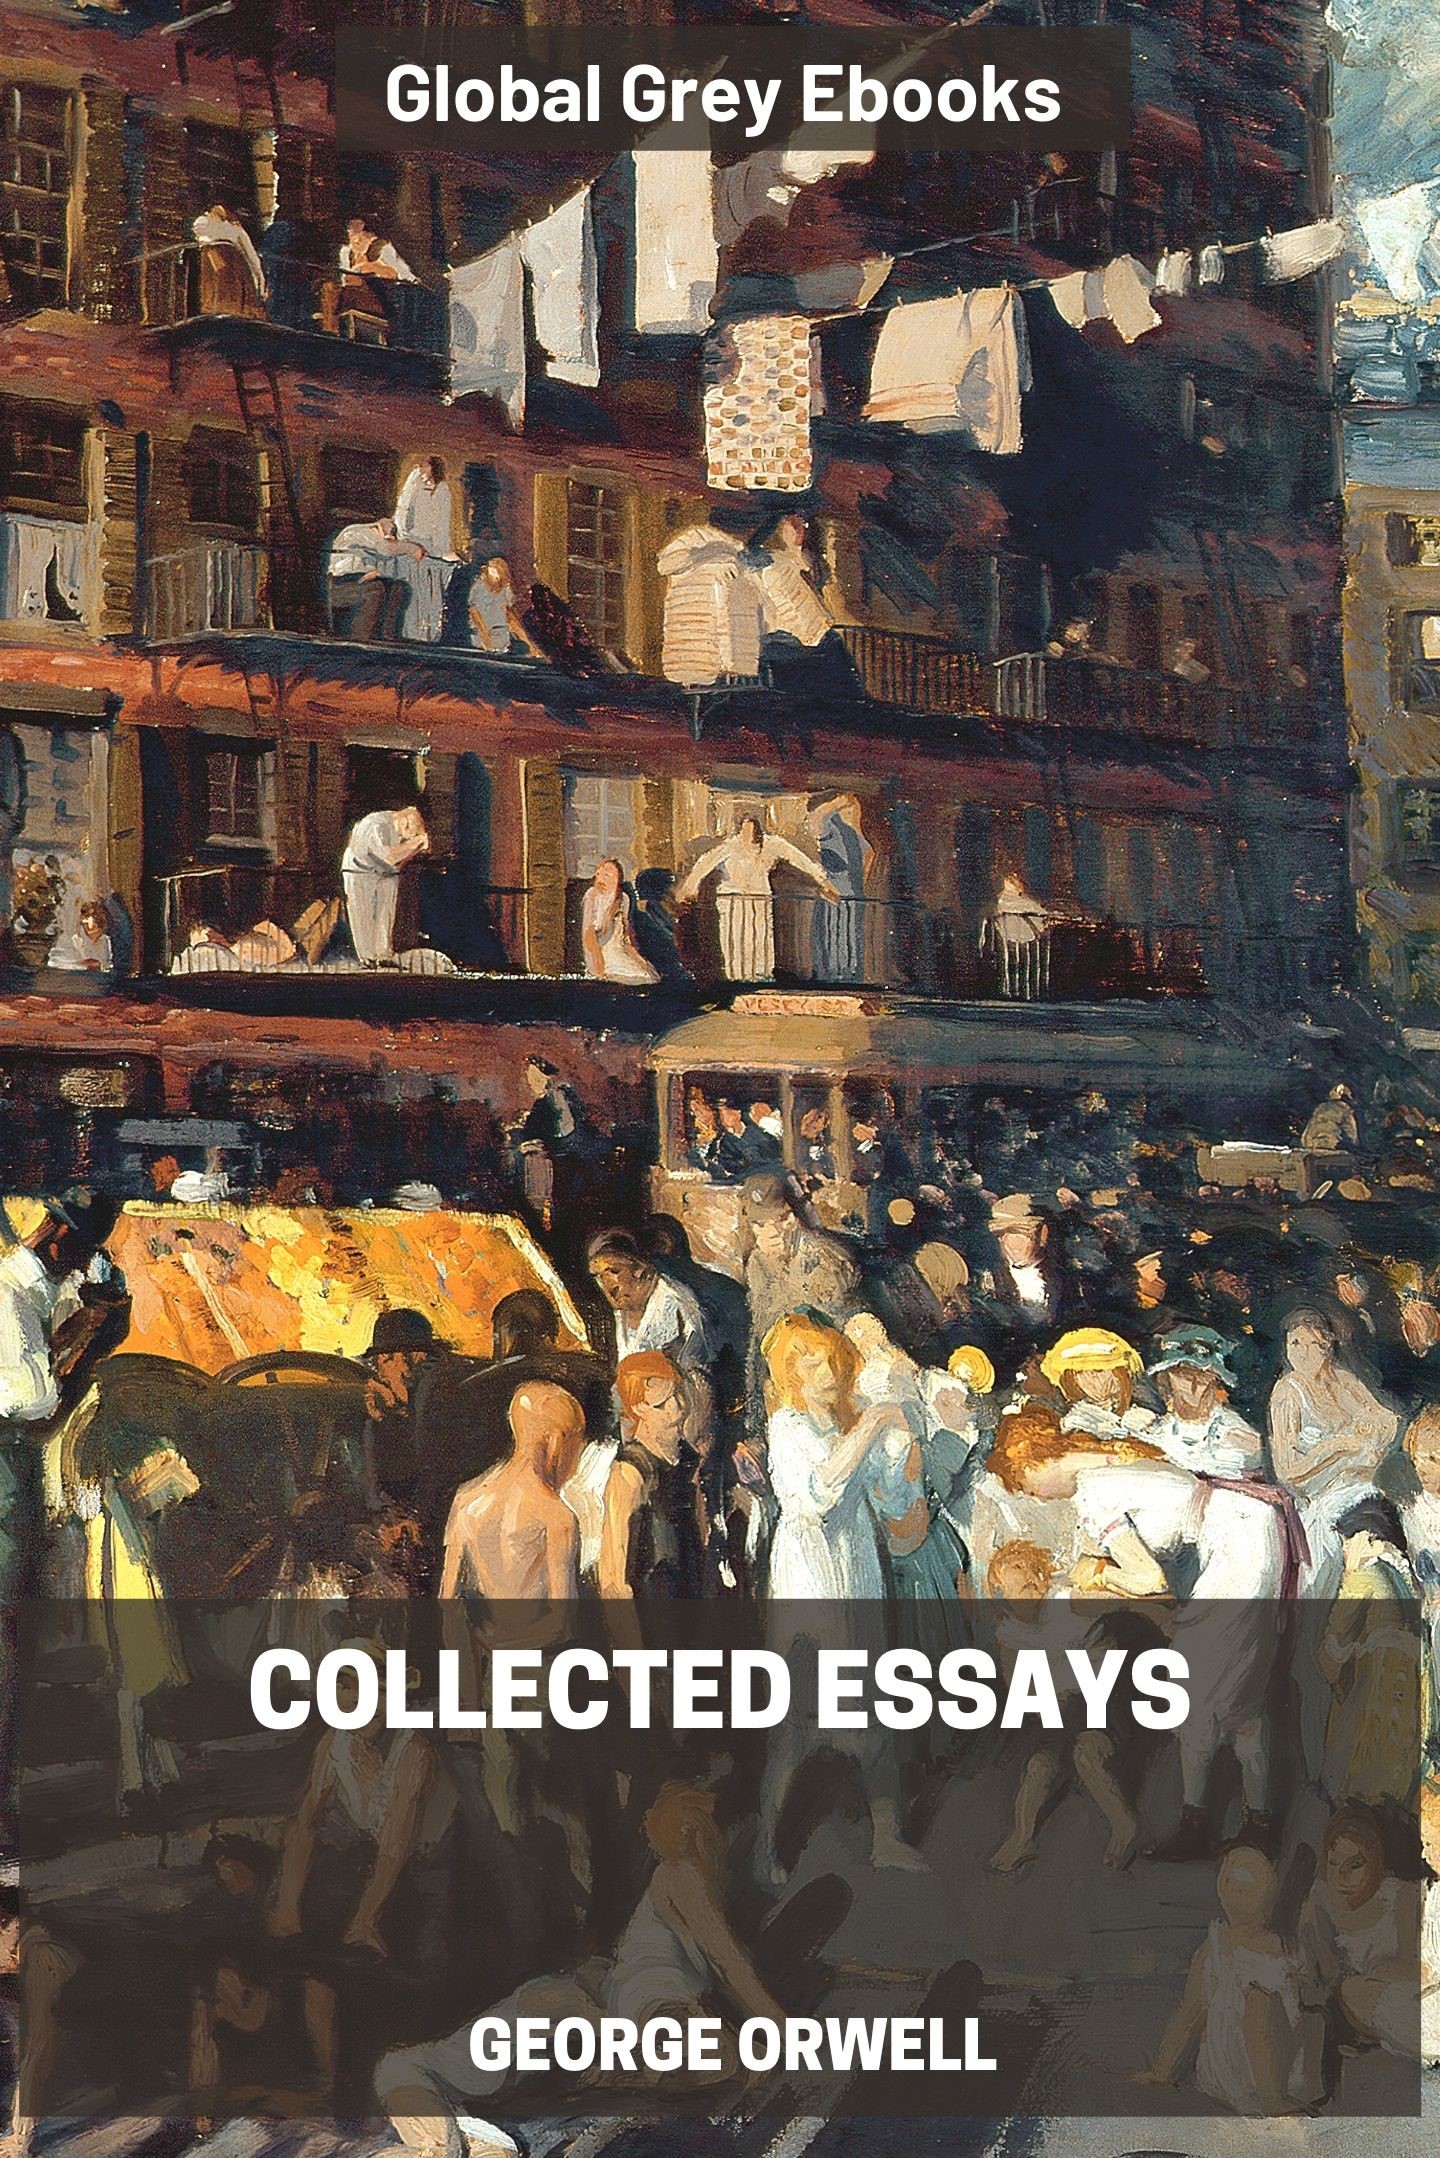 Collected Essays, by George Orwell - Free ebook - Global Grey ebooks